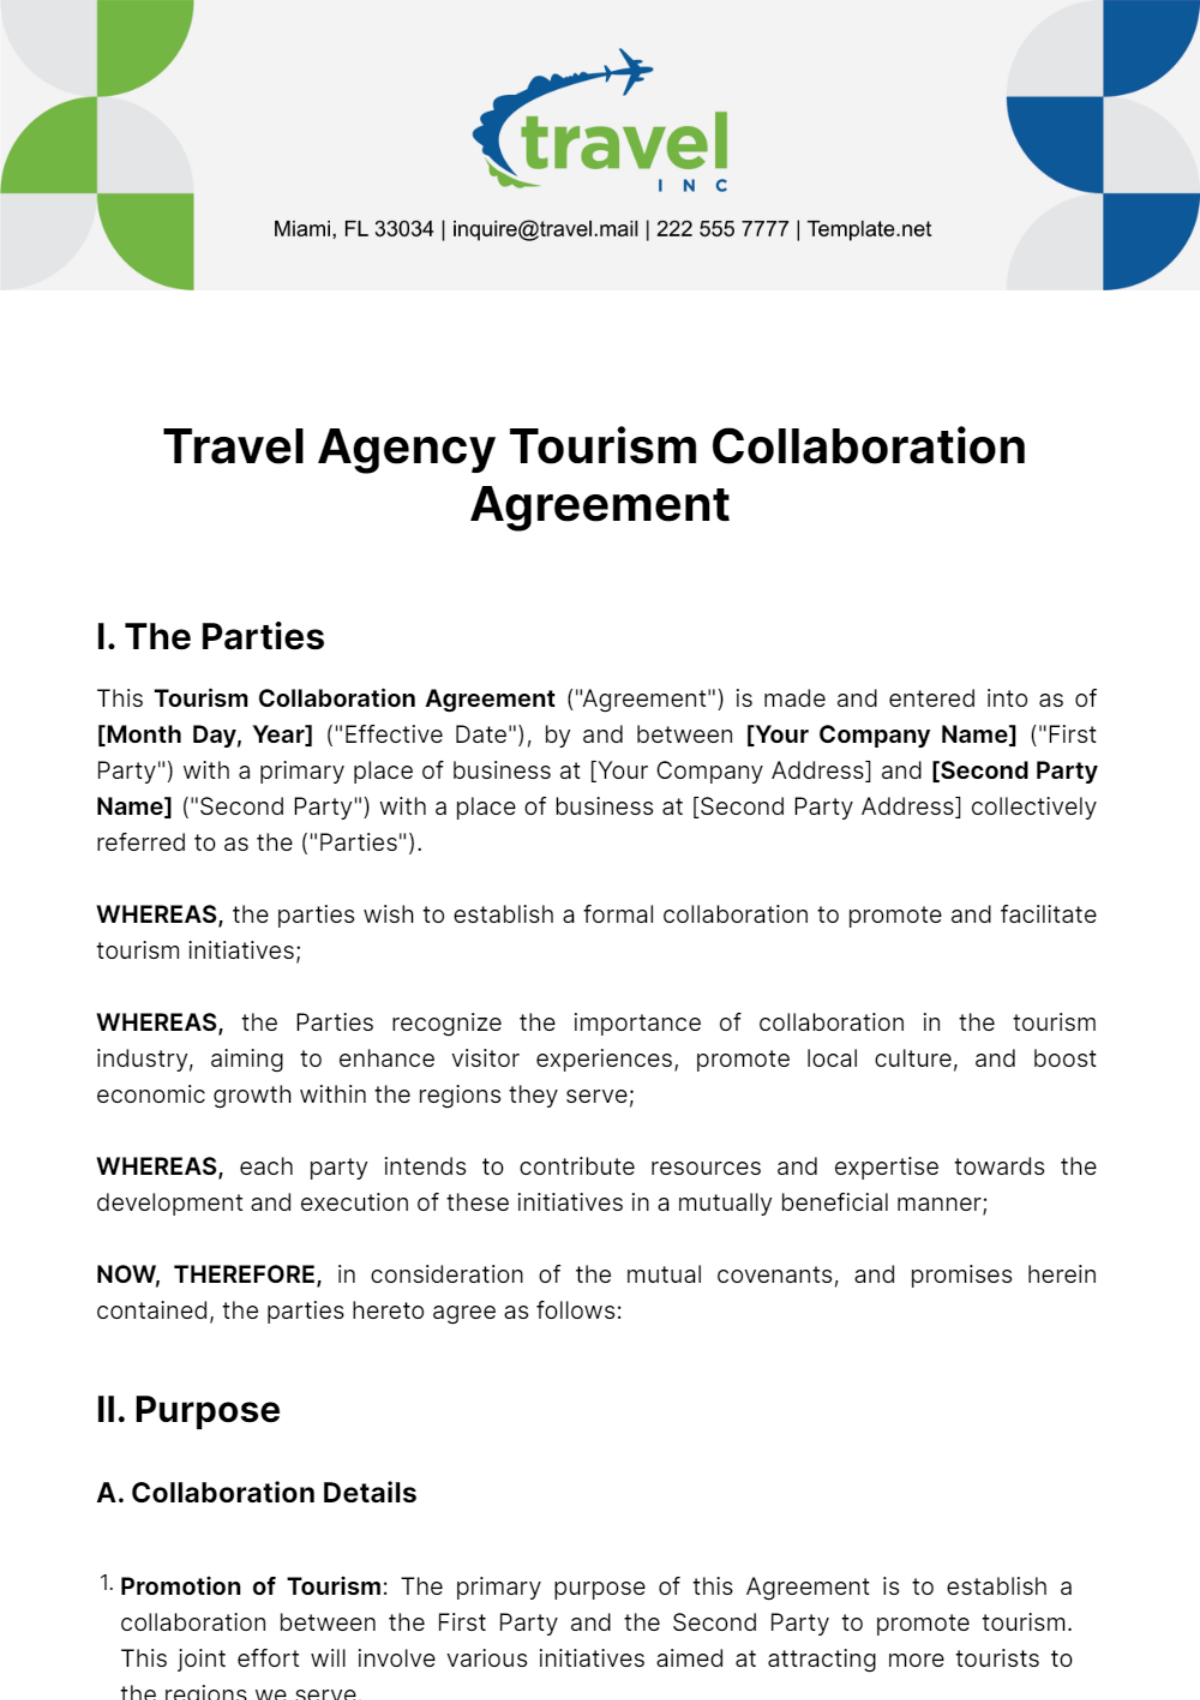 Travel Agency Tourism Collaboration Agreement Template